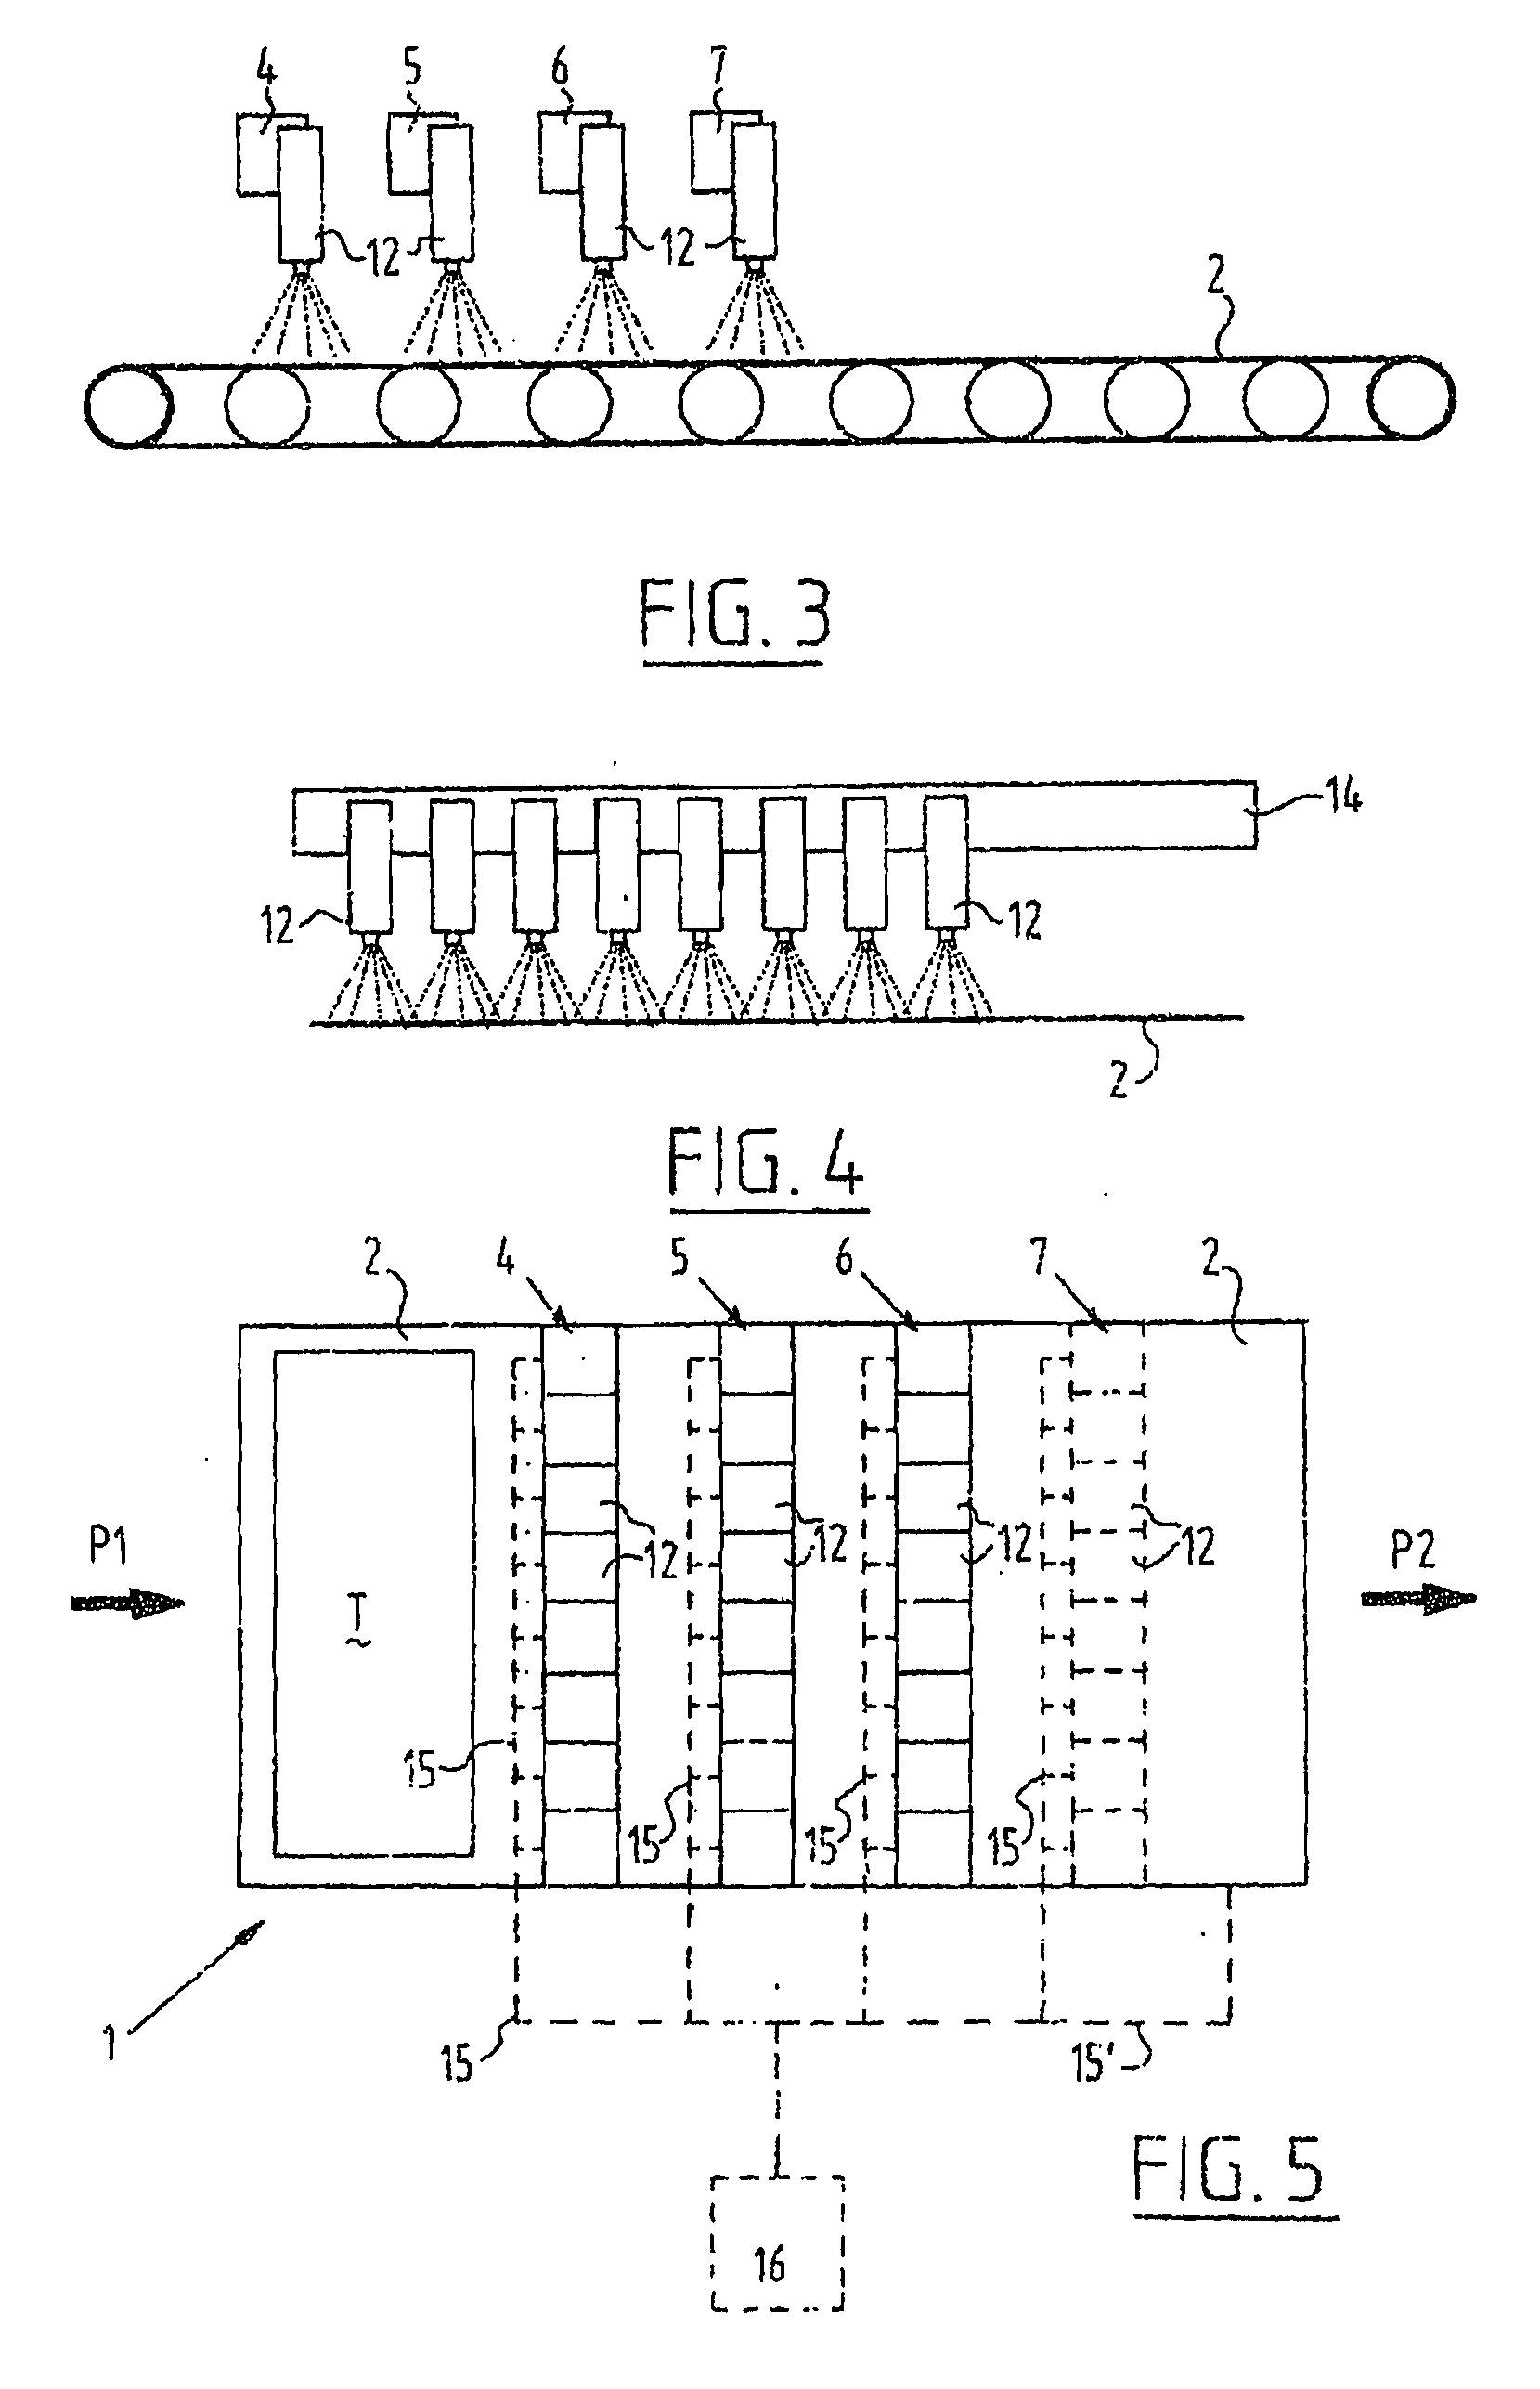 Method for Providing a Flame Retardant Finish of a Textile Article